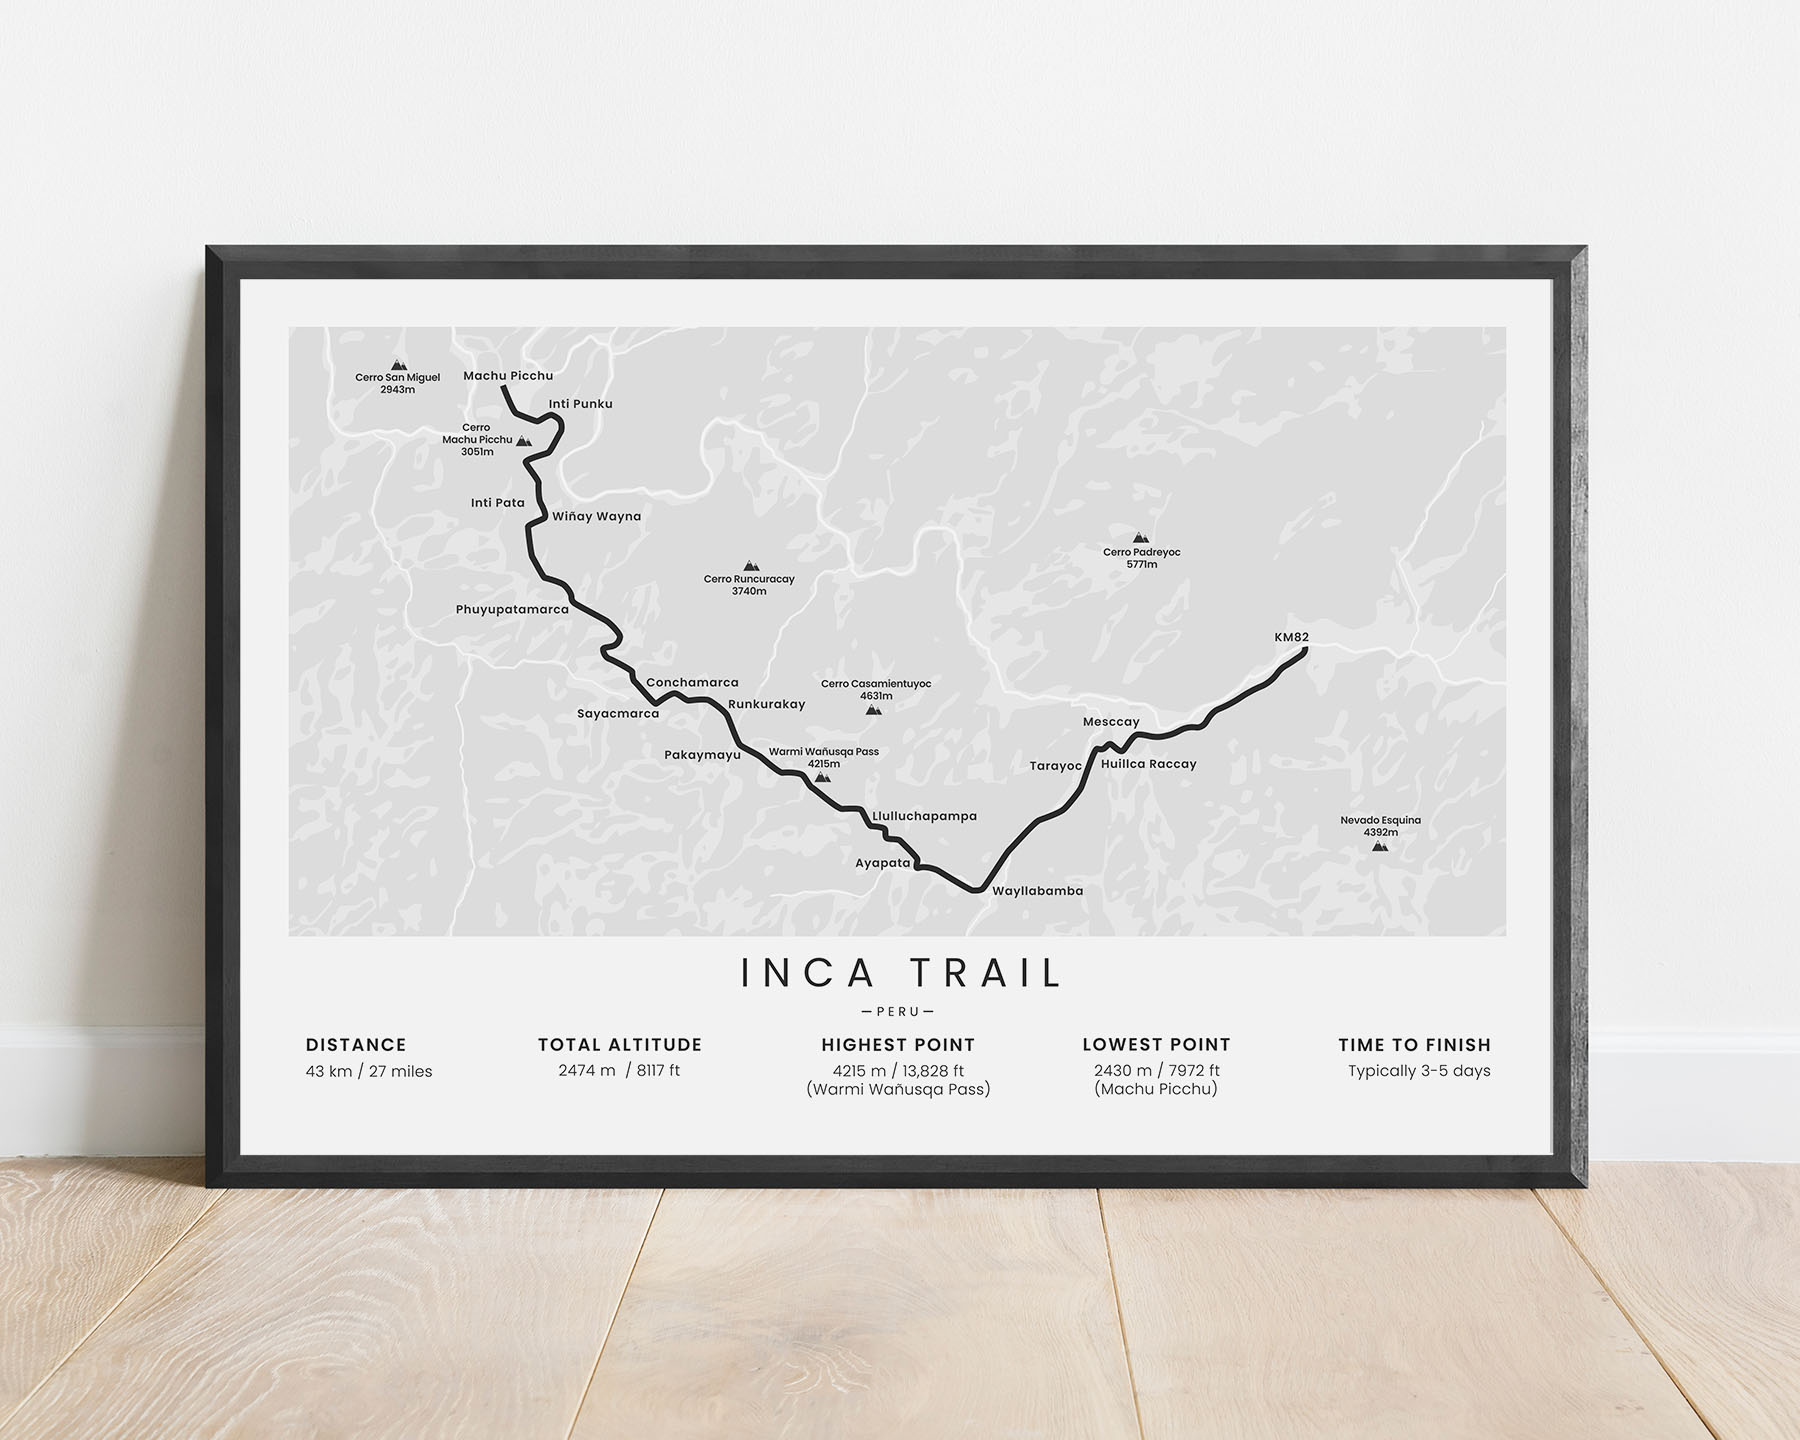 Inca Trail (Peru) route poster with white background